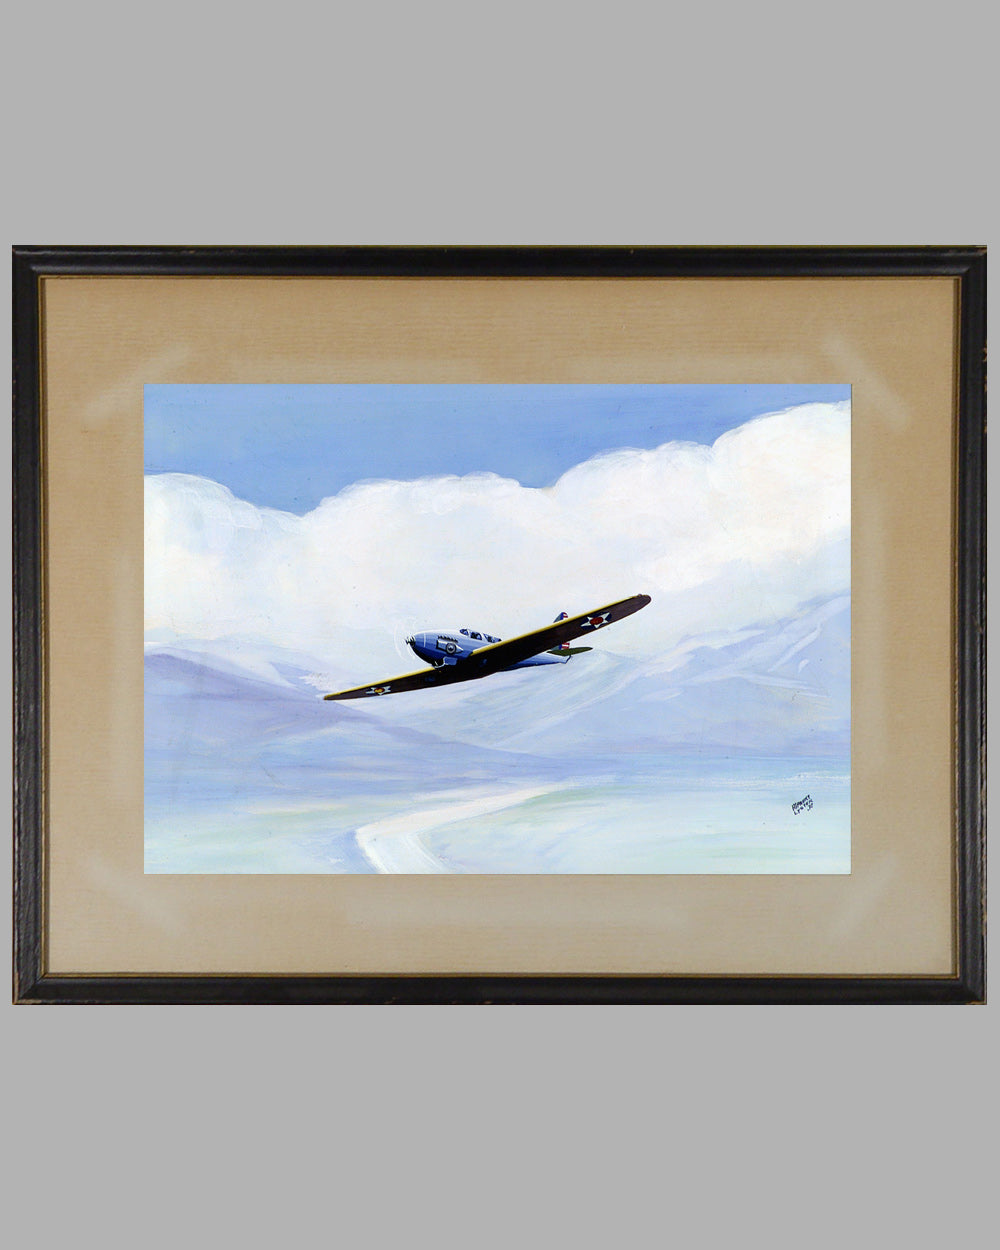 Prototype Pre WWII era American Fighter painting by Alpnarly Lyster